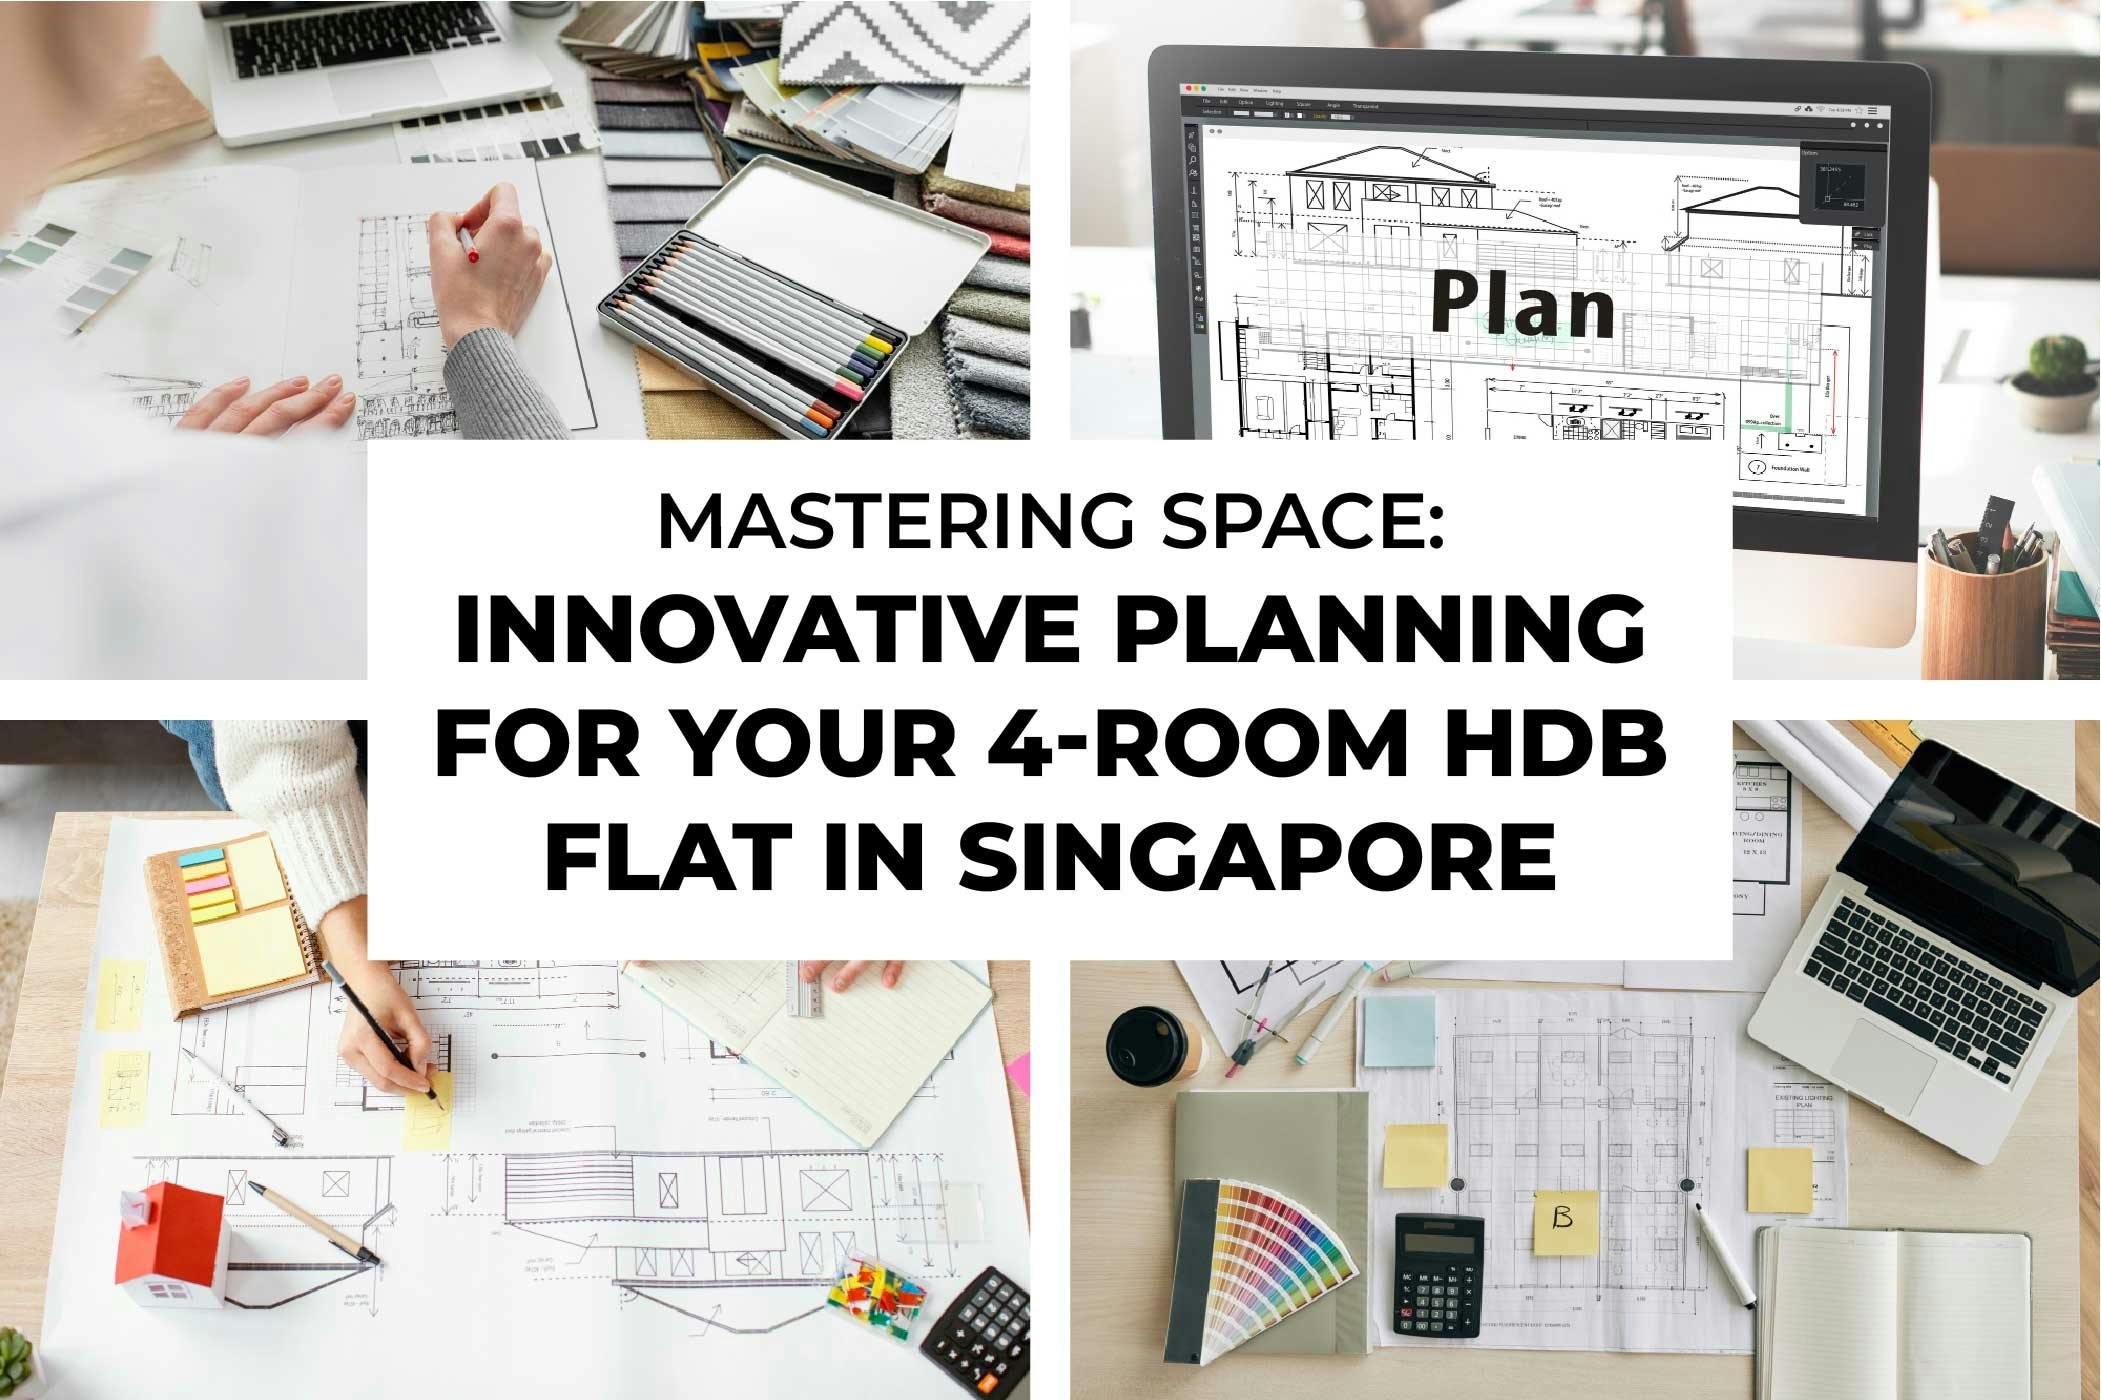 Mastering Space: Innovative Planning for Your 4-Room HDB Flat in Singapore